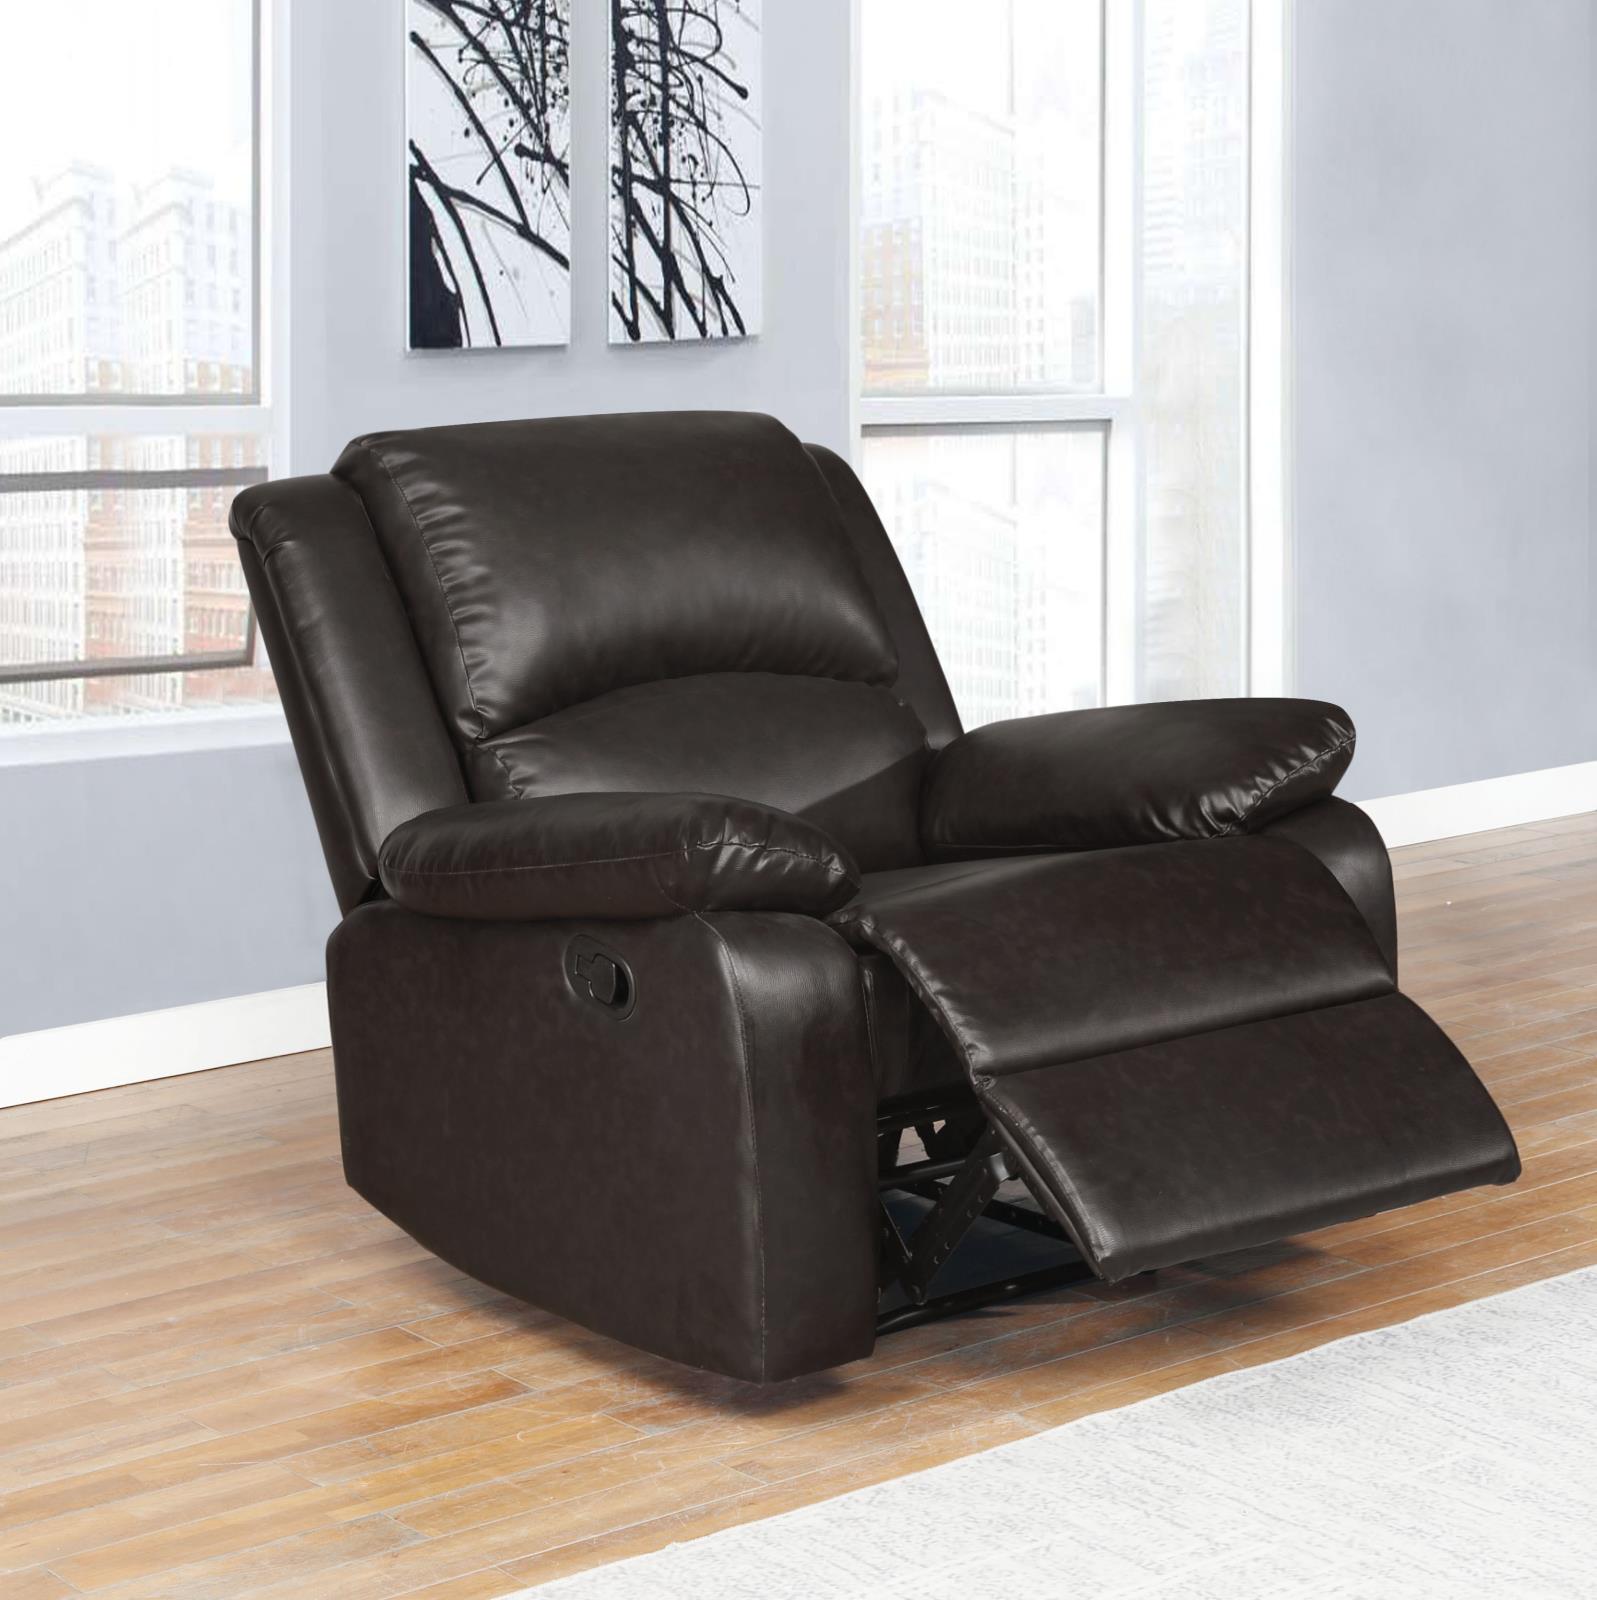 Boston Upholstered Tufted Recliner Two-tone Brown - What A Room